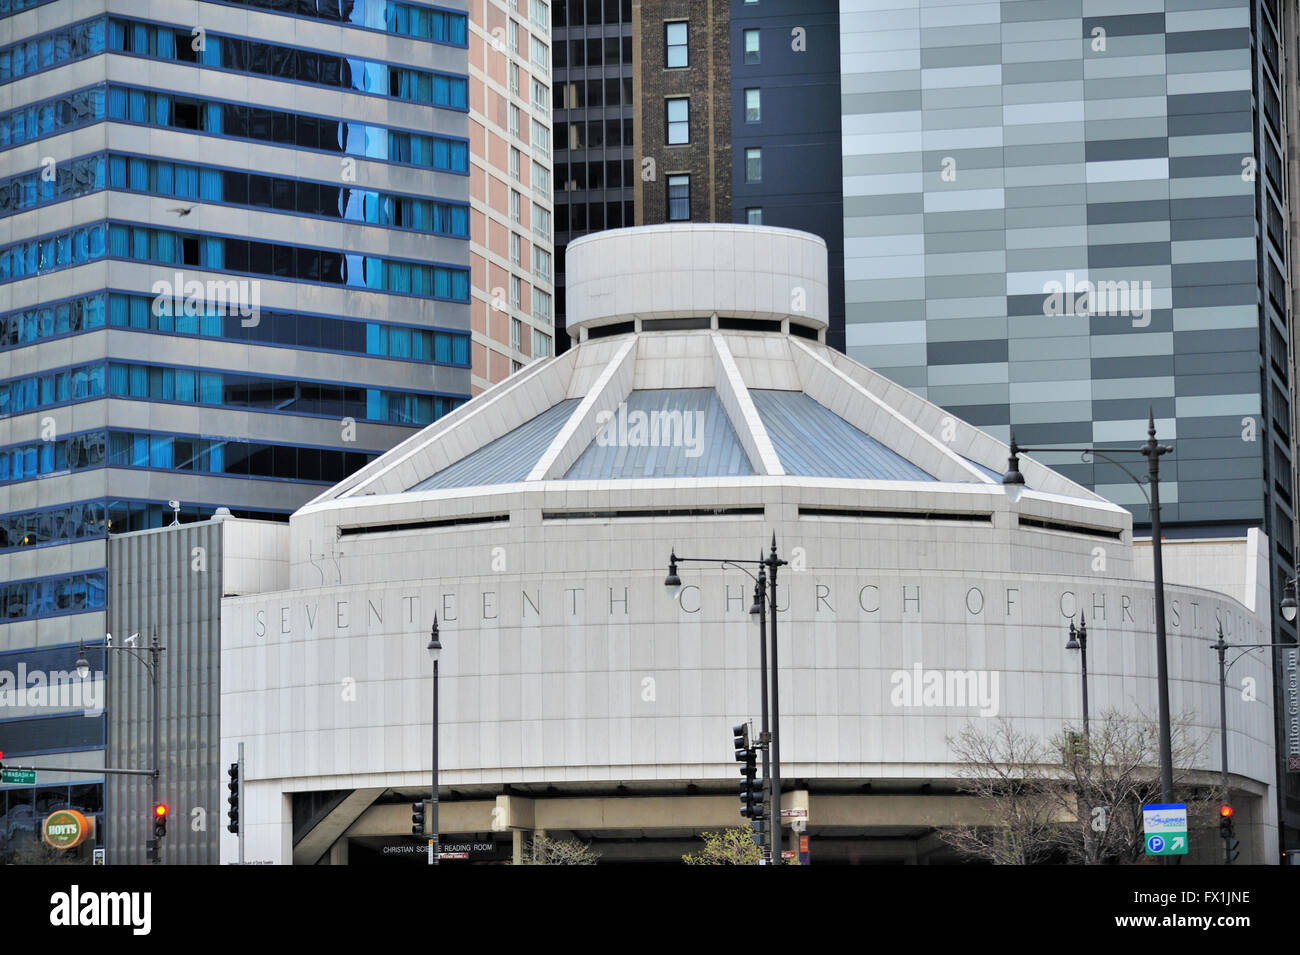 The Seventeenth Church of Christ in Chicago was built in 1968.  The Christian Scientist church has an award-winning style. Chicago, Illinois, USA. Stock Photo